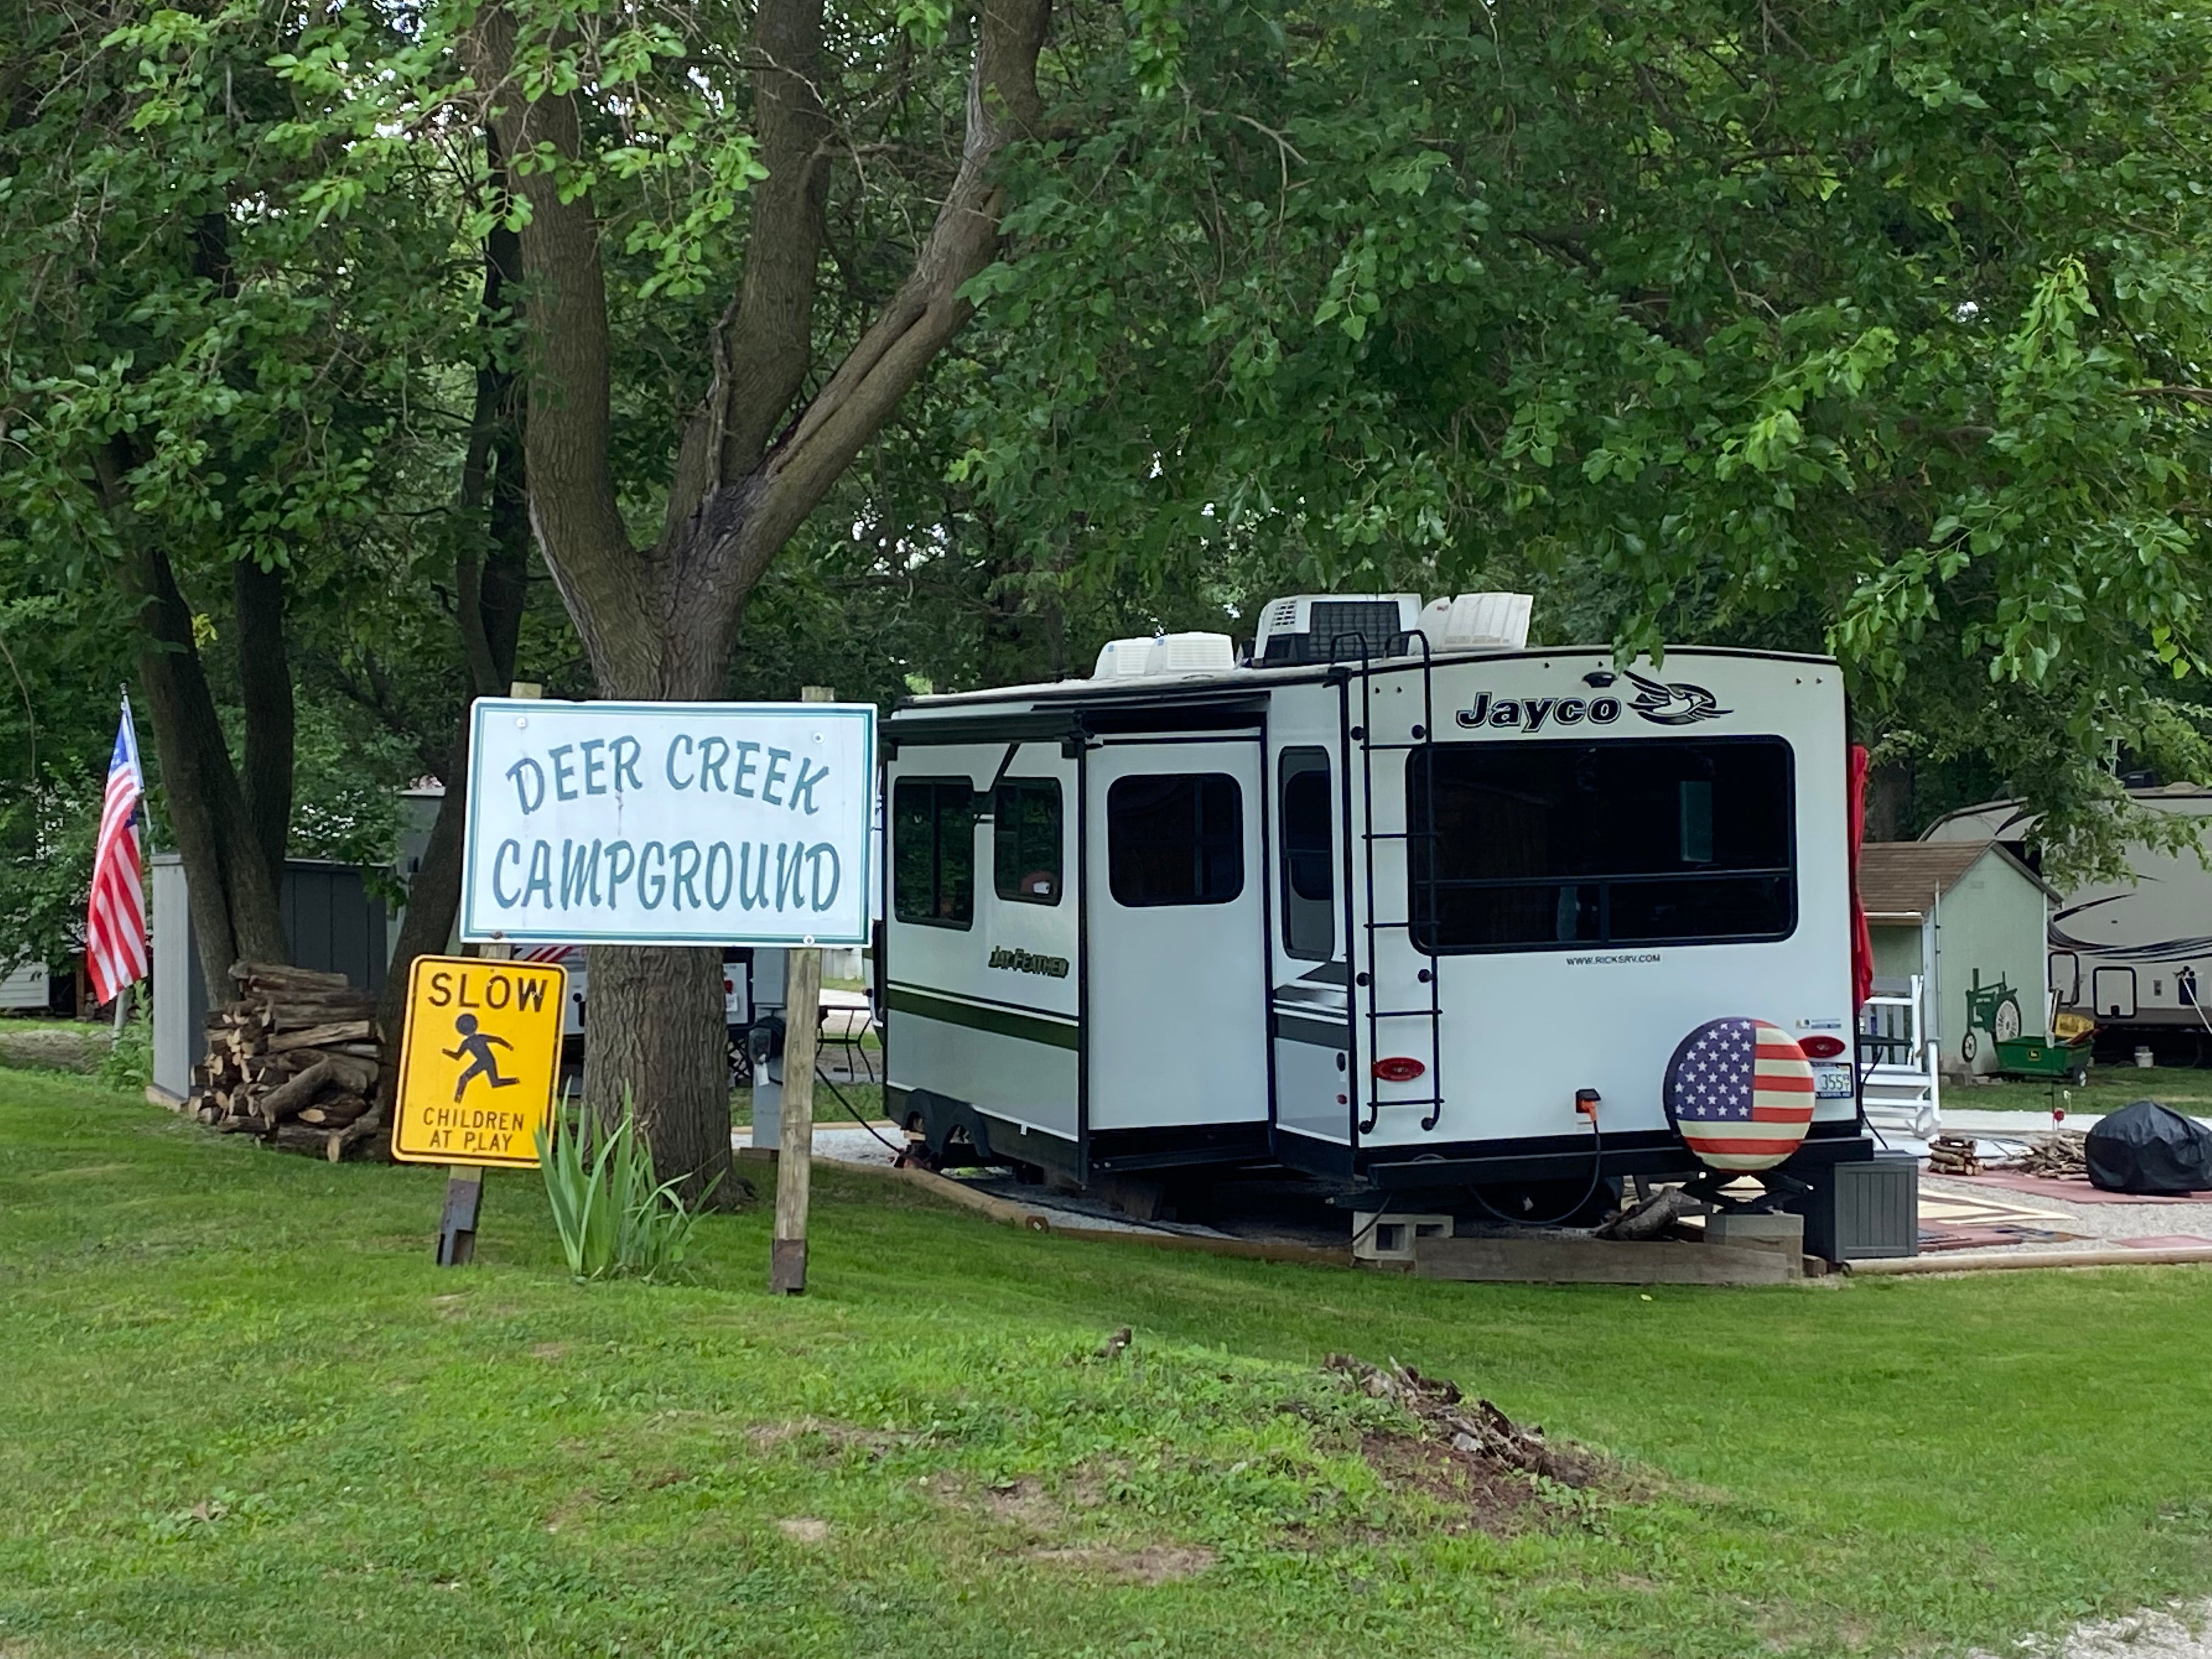 Camper submitted image from Deer Creek Campground - 2